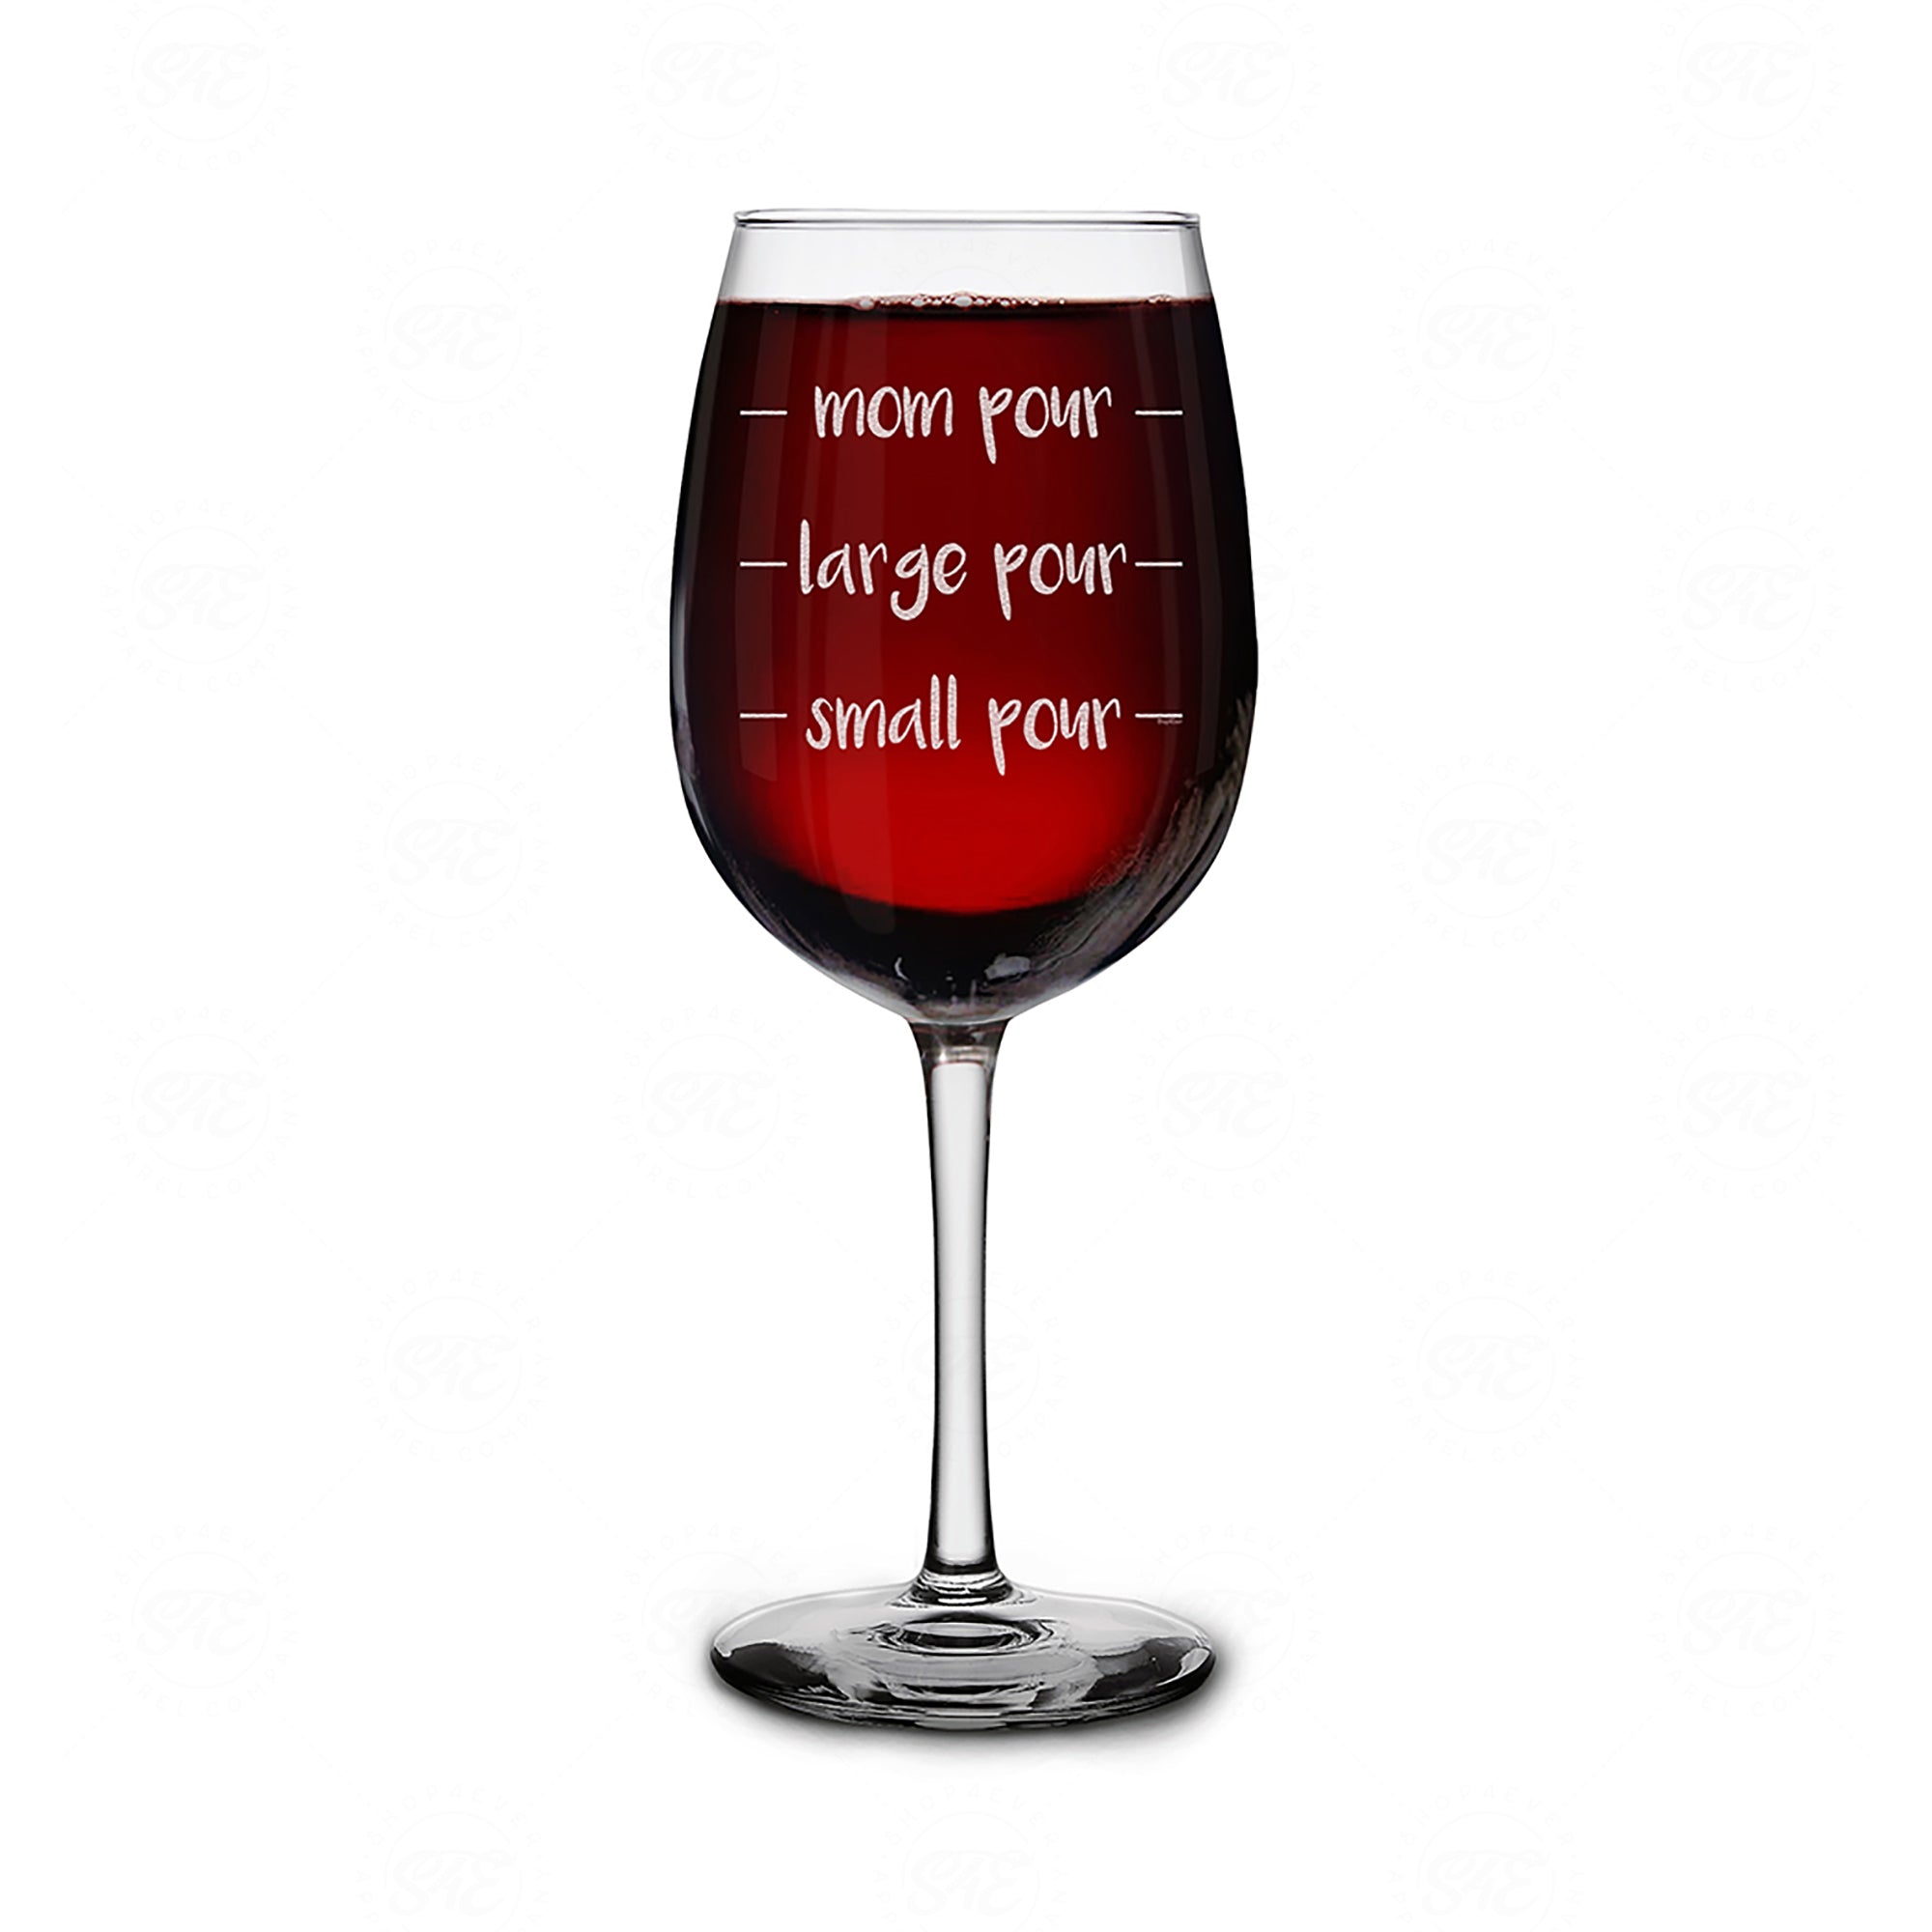 Mom Pour Large Pour Small Pour Engraved Stemmed Wine Glass Funny New Mom Gift (16 oz.)